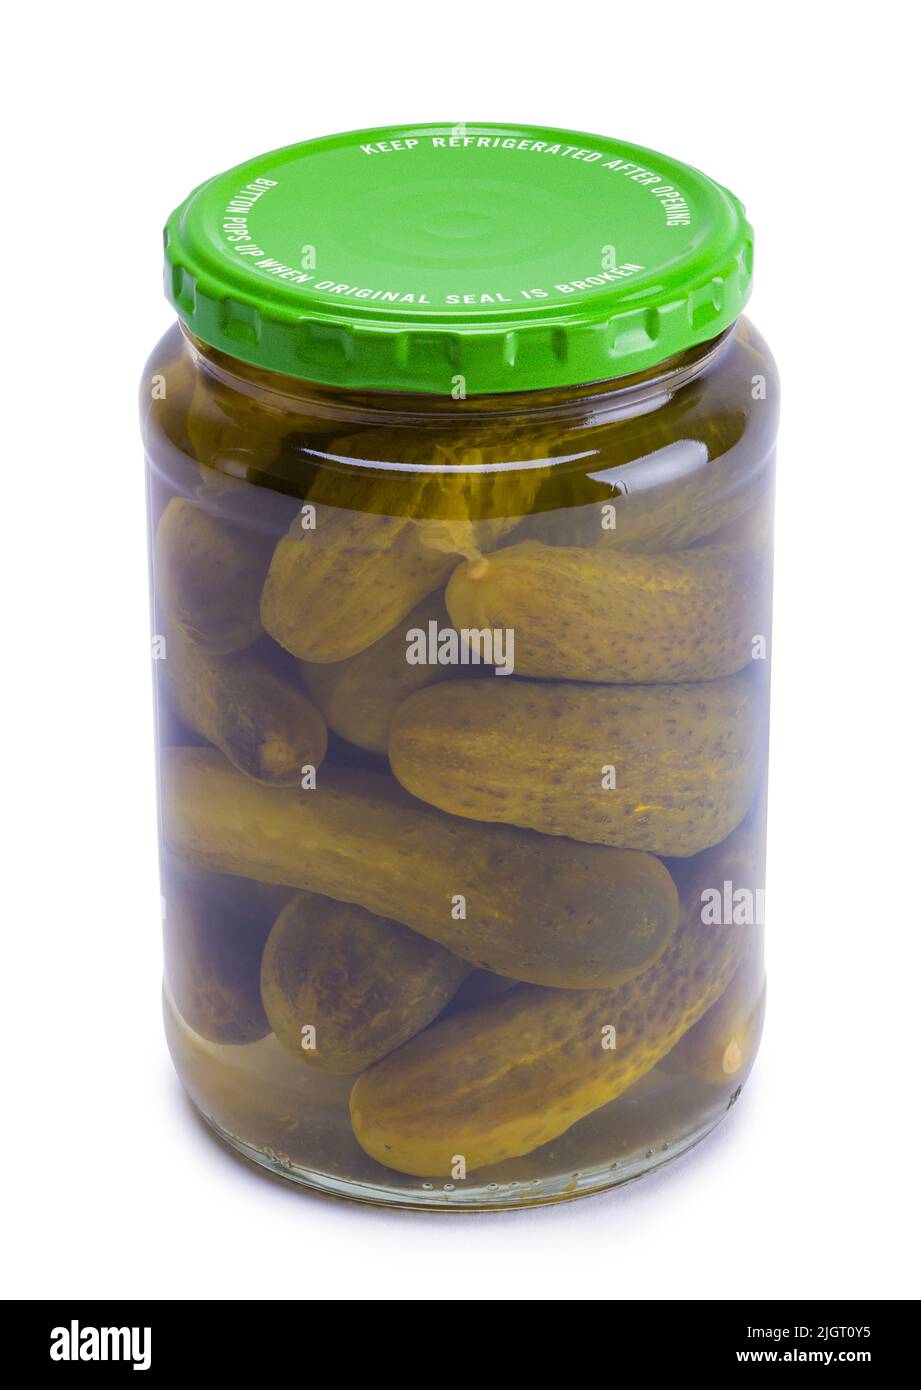 Whole Pickles in Jar Cut Out on White. Stock Photo